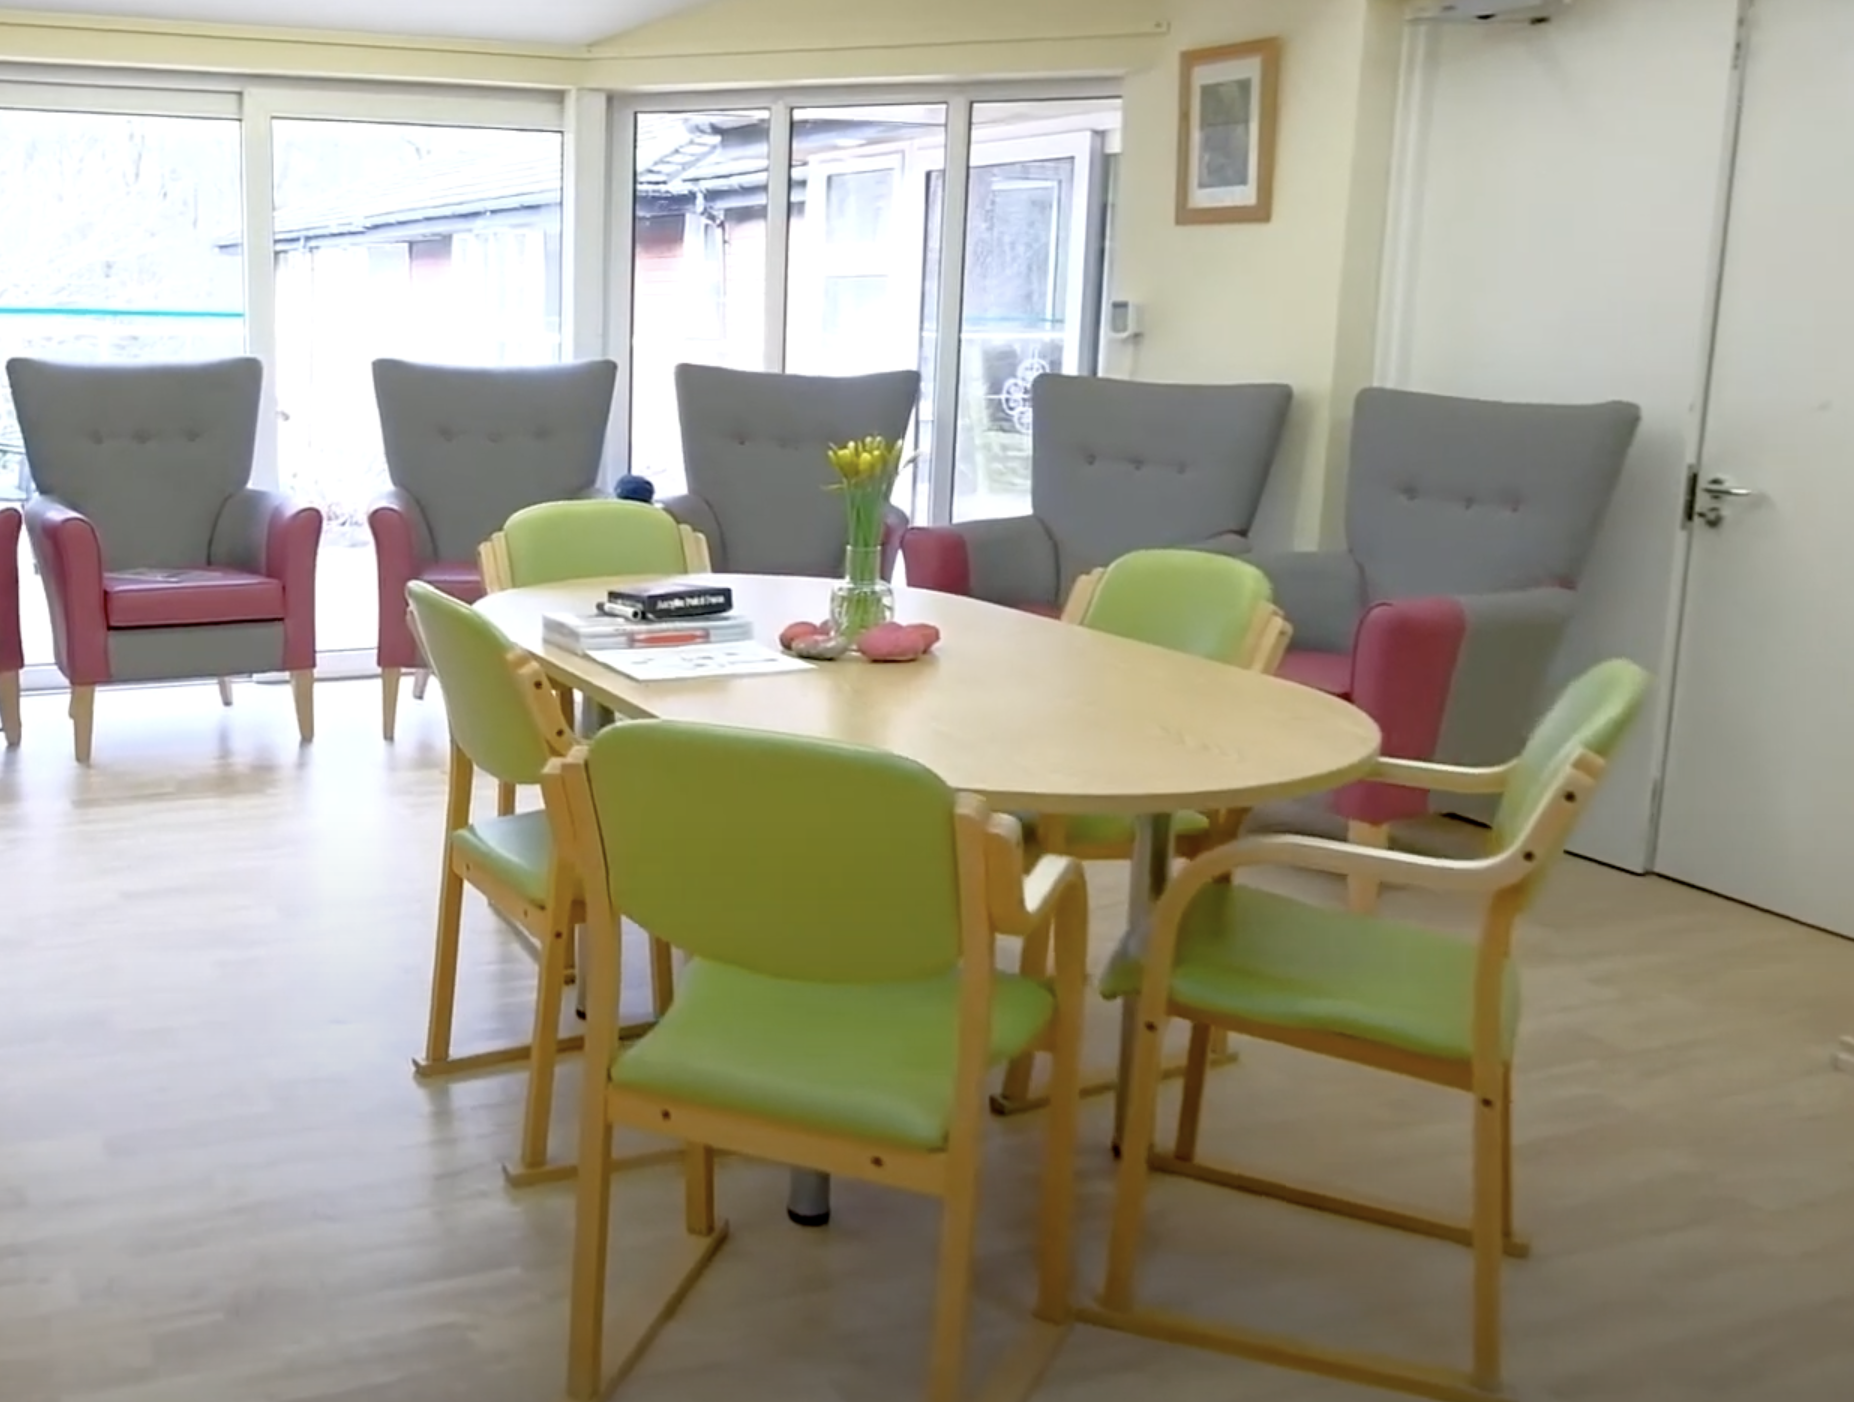 Sussex Housing and Care - Woodlands care home 3